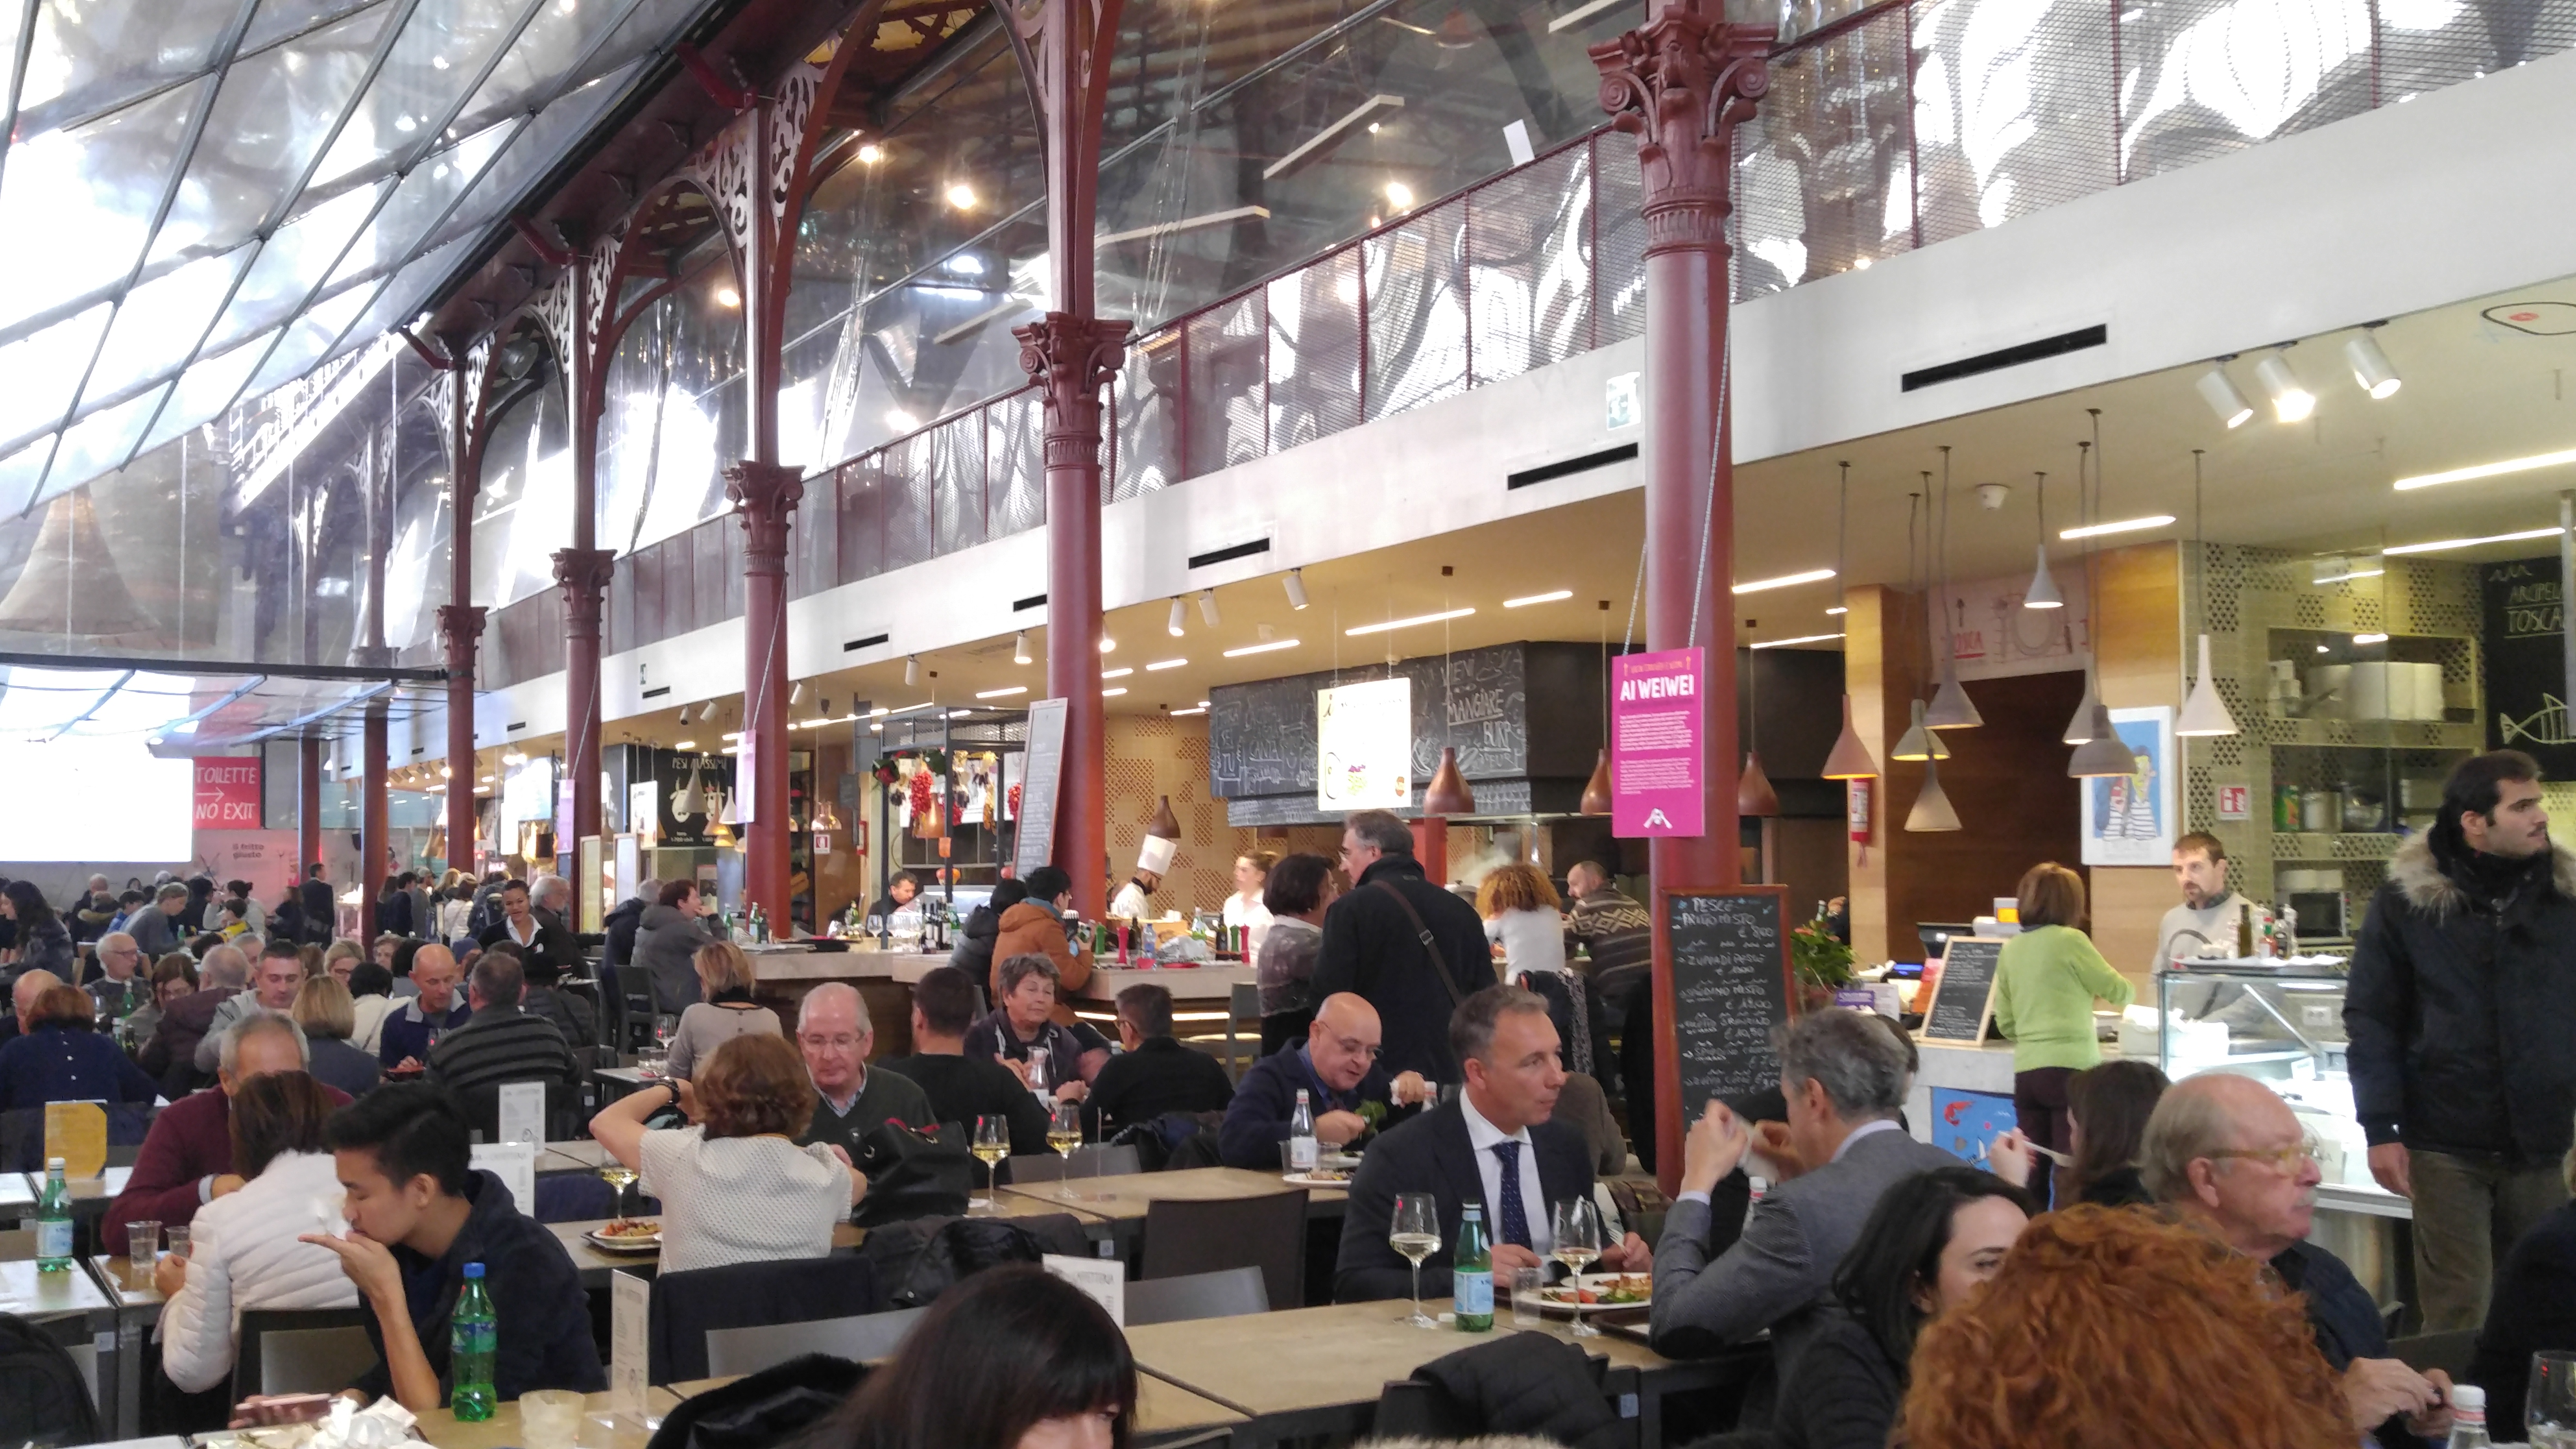 The Food Court at Mercato Centrale Firenze